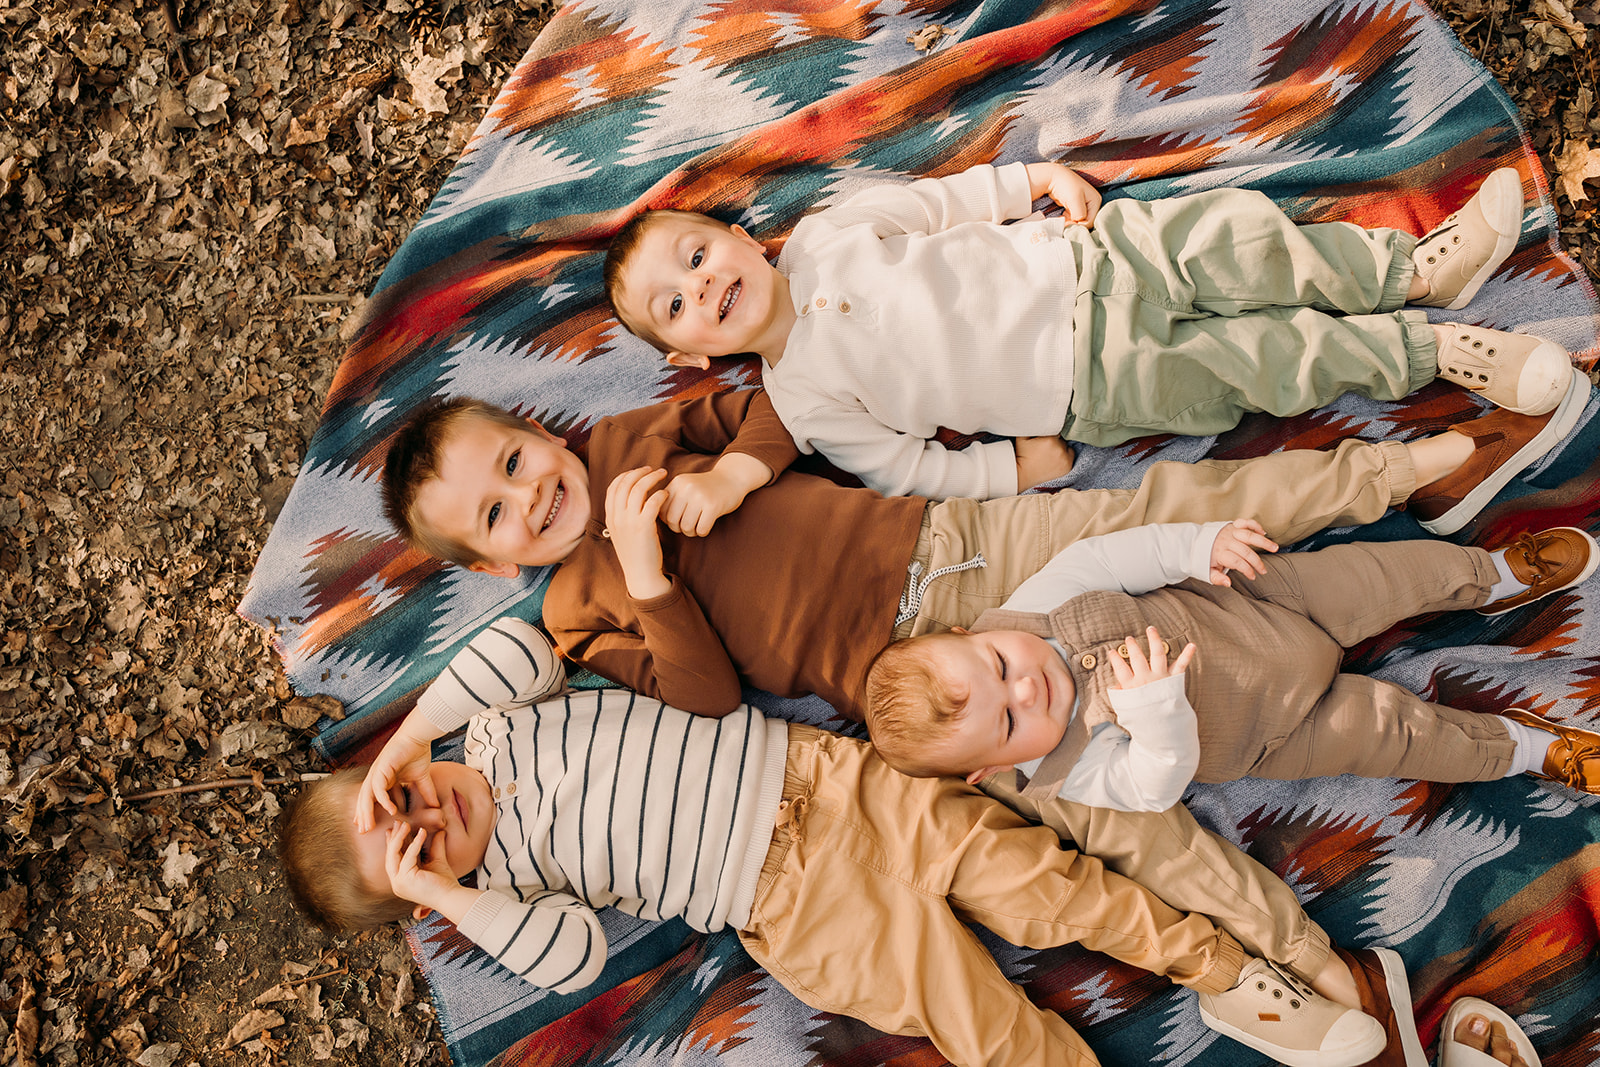 Lively kids embracing the outdoors in a vibrant photoshoot